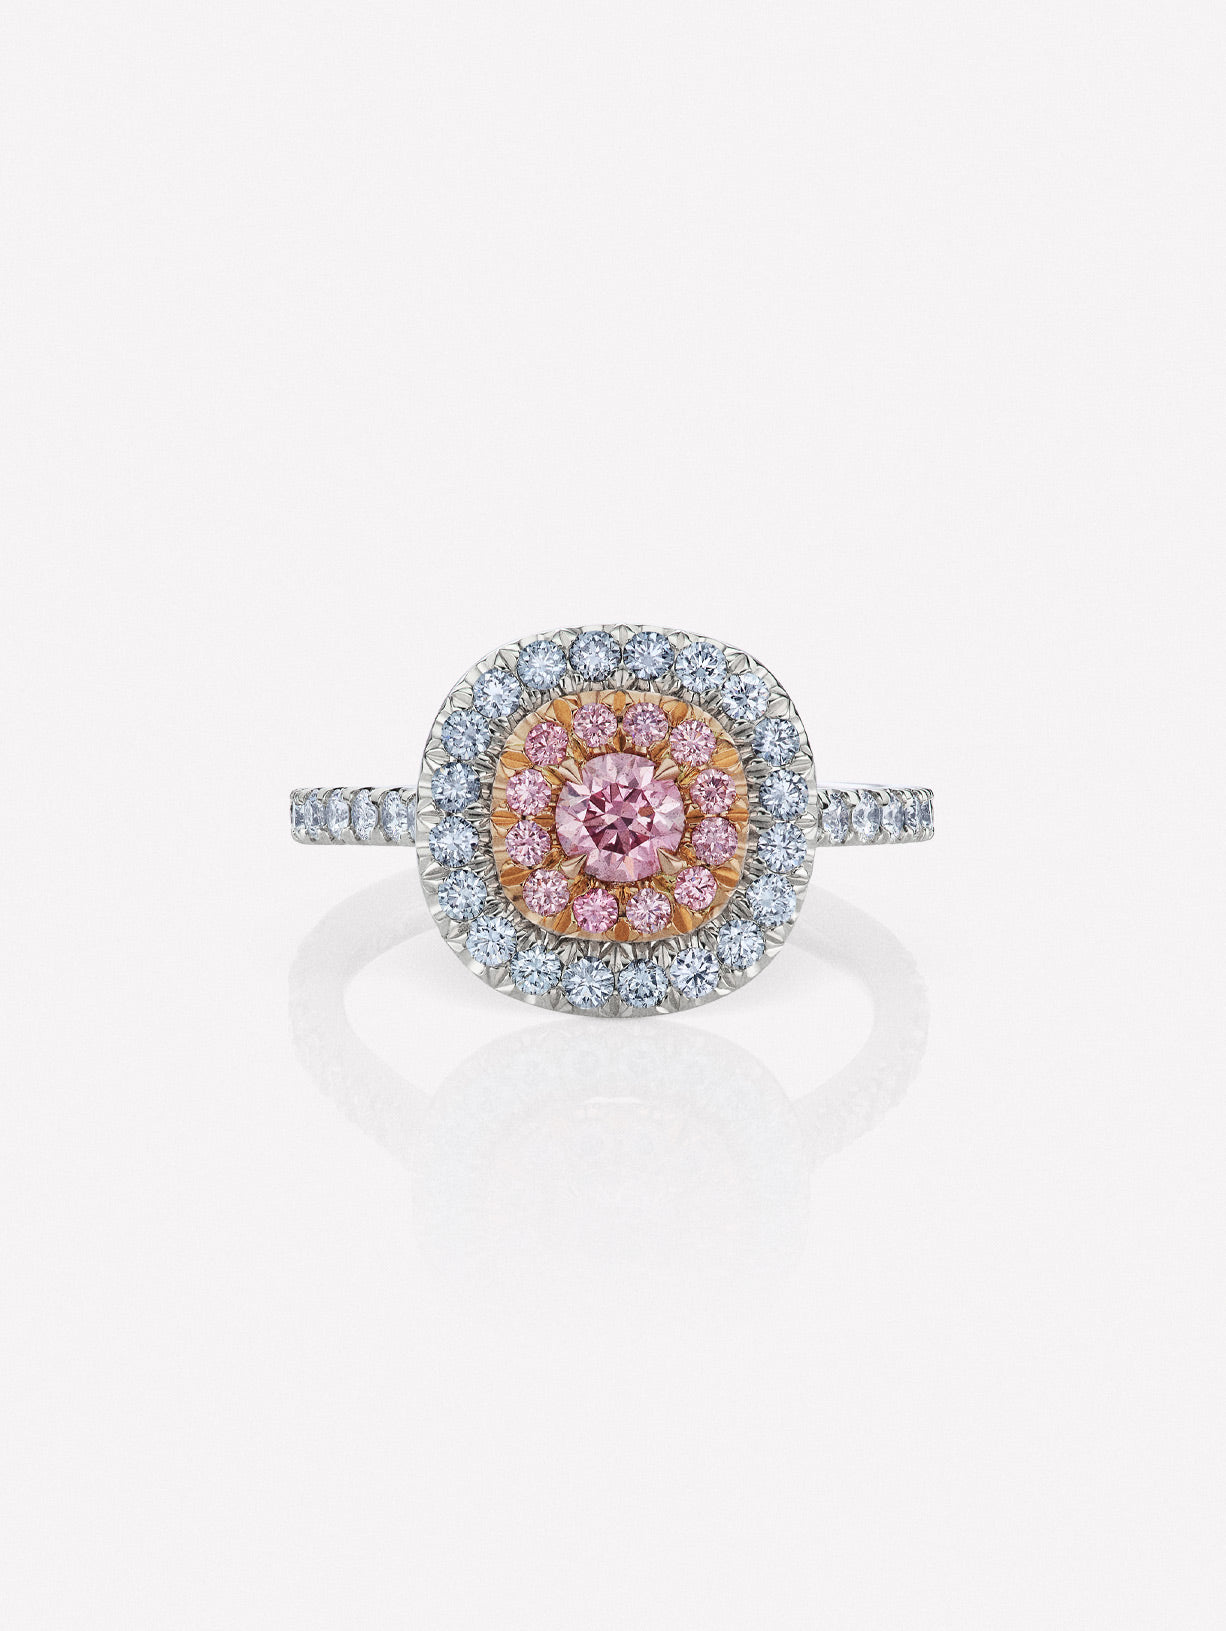 Argyle Pink™ and Blue Diamond Classic Halo Ring - Pink Diamonds, J FINE - J Fine, ring - Pink Diamond Jewelry, argyle-pink™-and-blue-diamond-classic-halo-ring-by-j-fine - Argyle Pink Diam